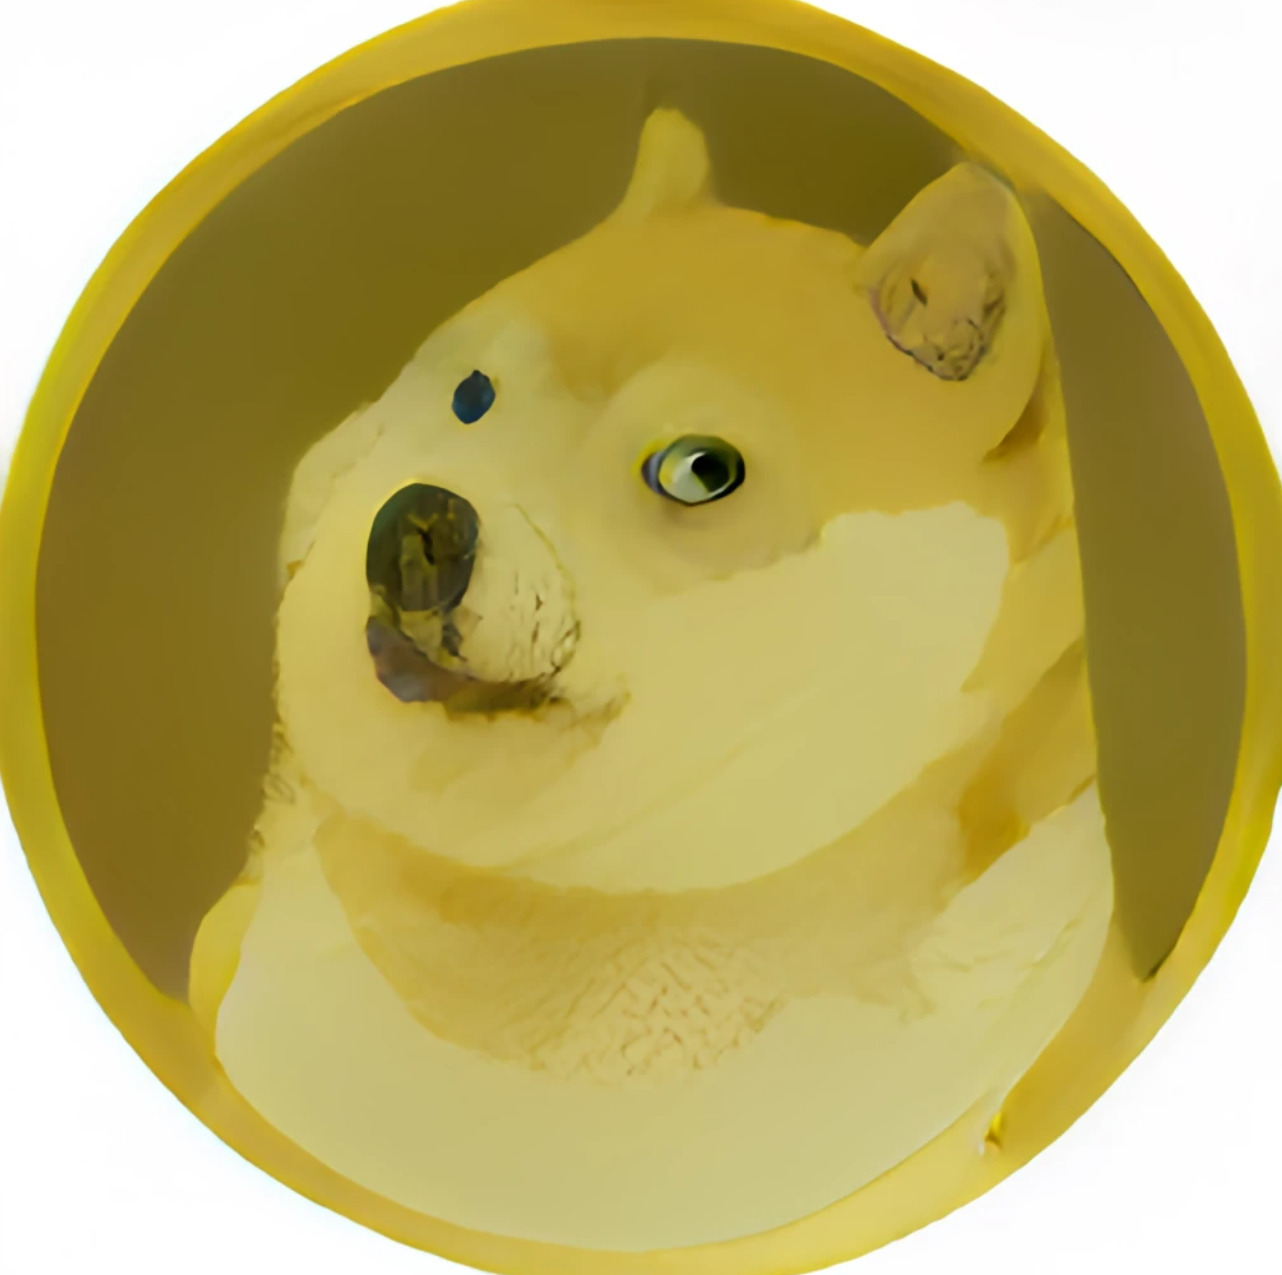 Crypto Analysts Also Claim Dogecoin And Shiba Inu Could Find Their Web3 Use Case